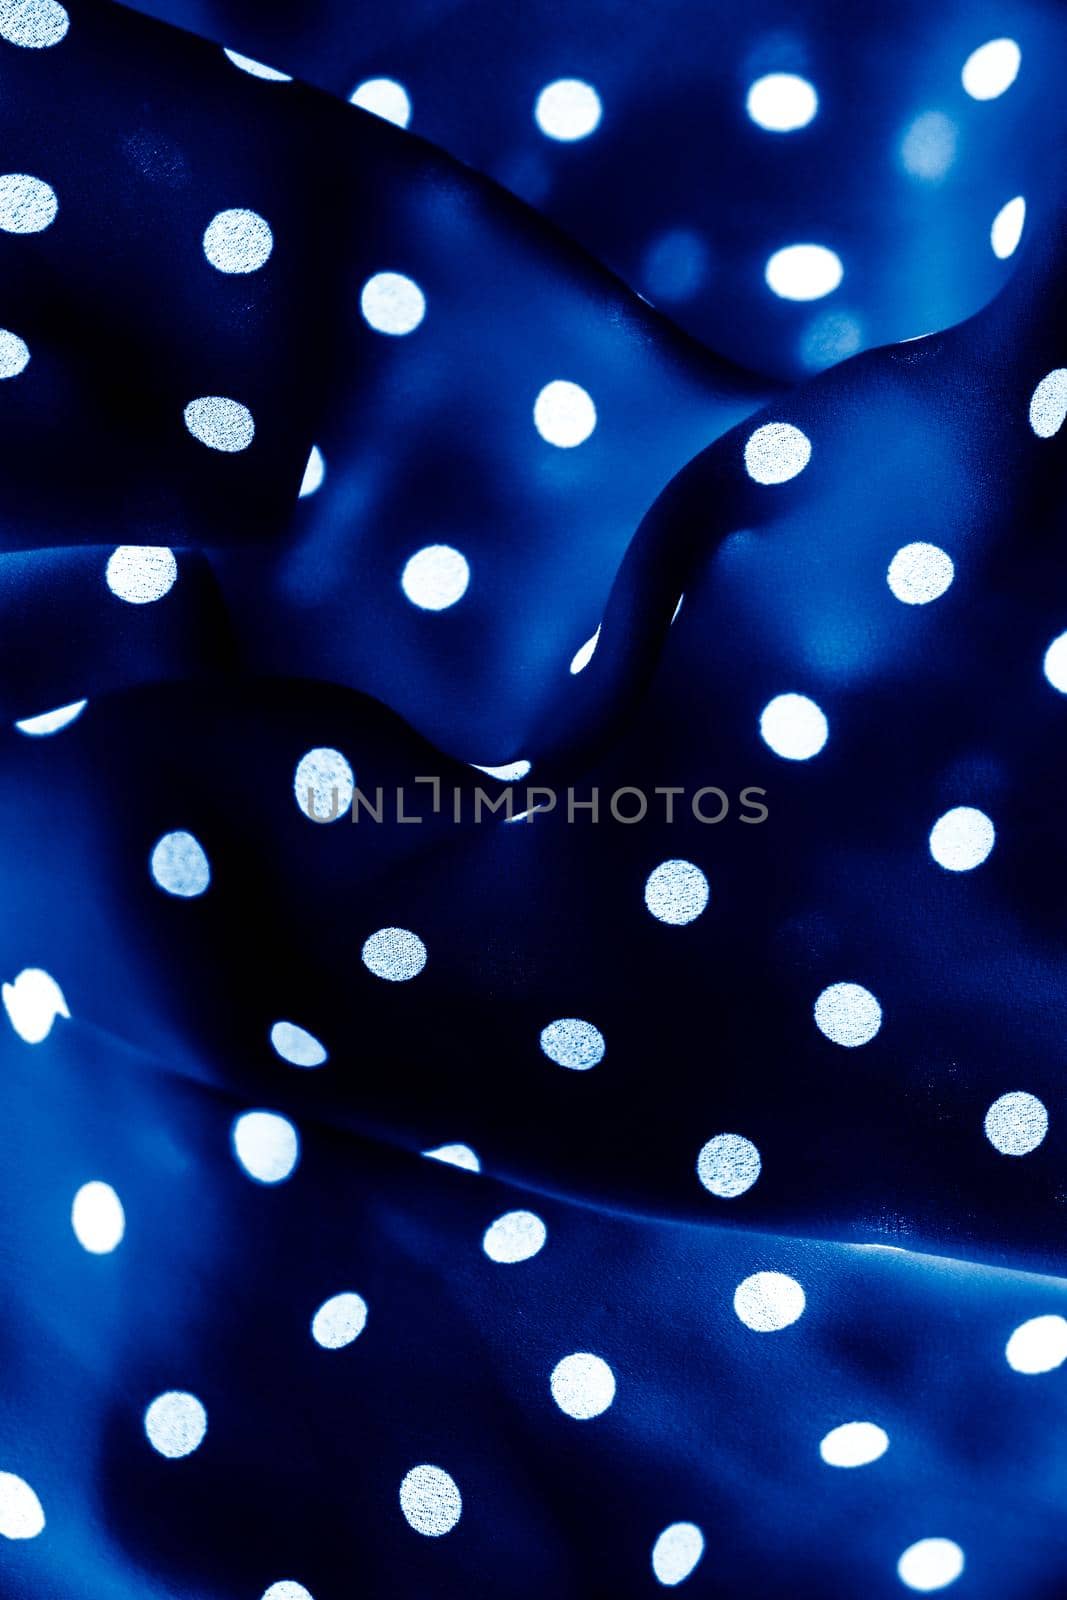 Fashion design, interior decor and vintage material concept - Classic polka dot textile background texture, white dots on blue luxury fabric design pattern